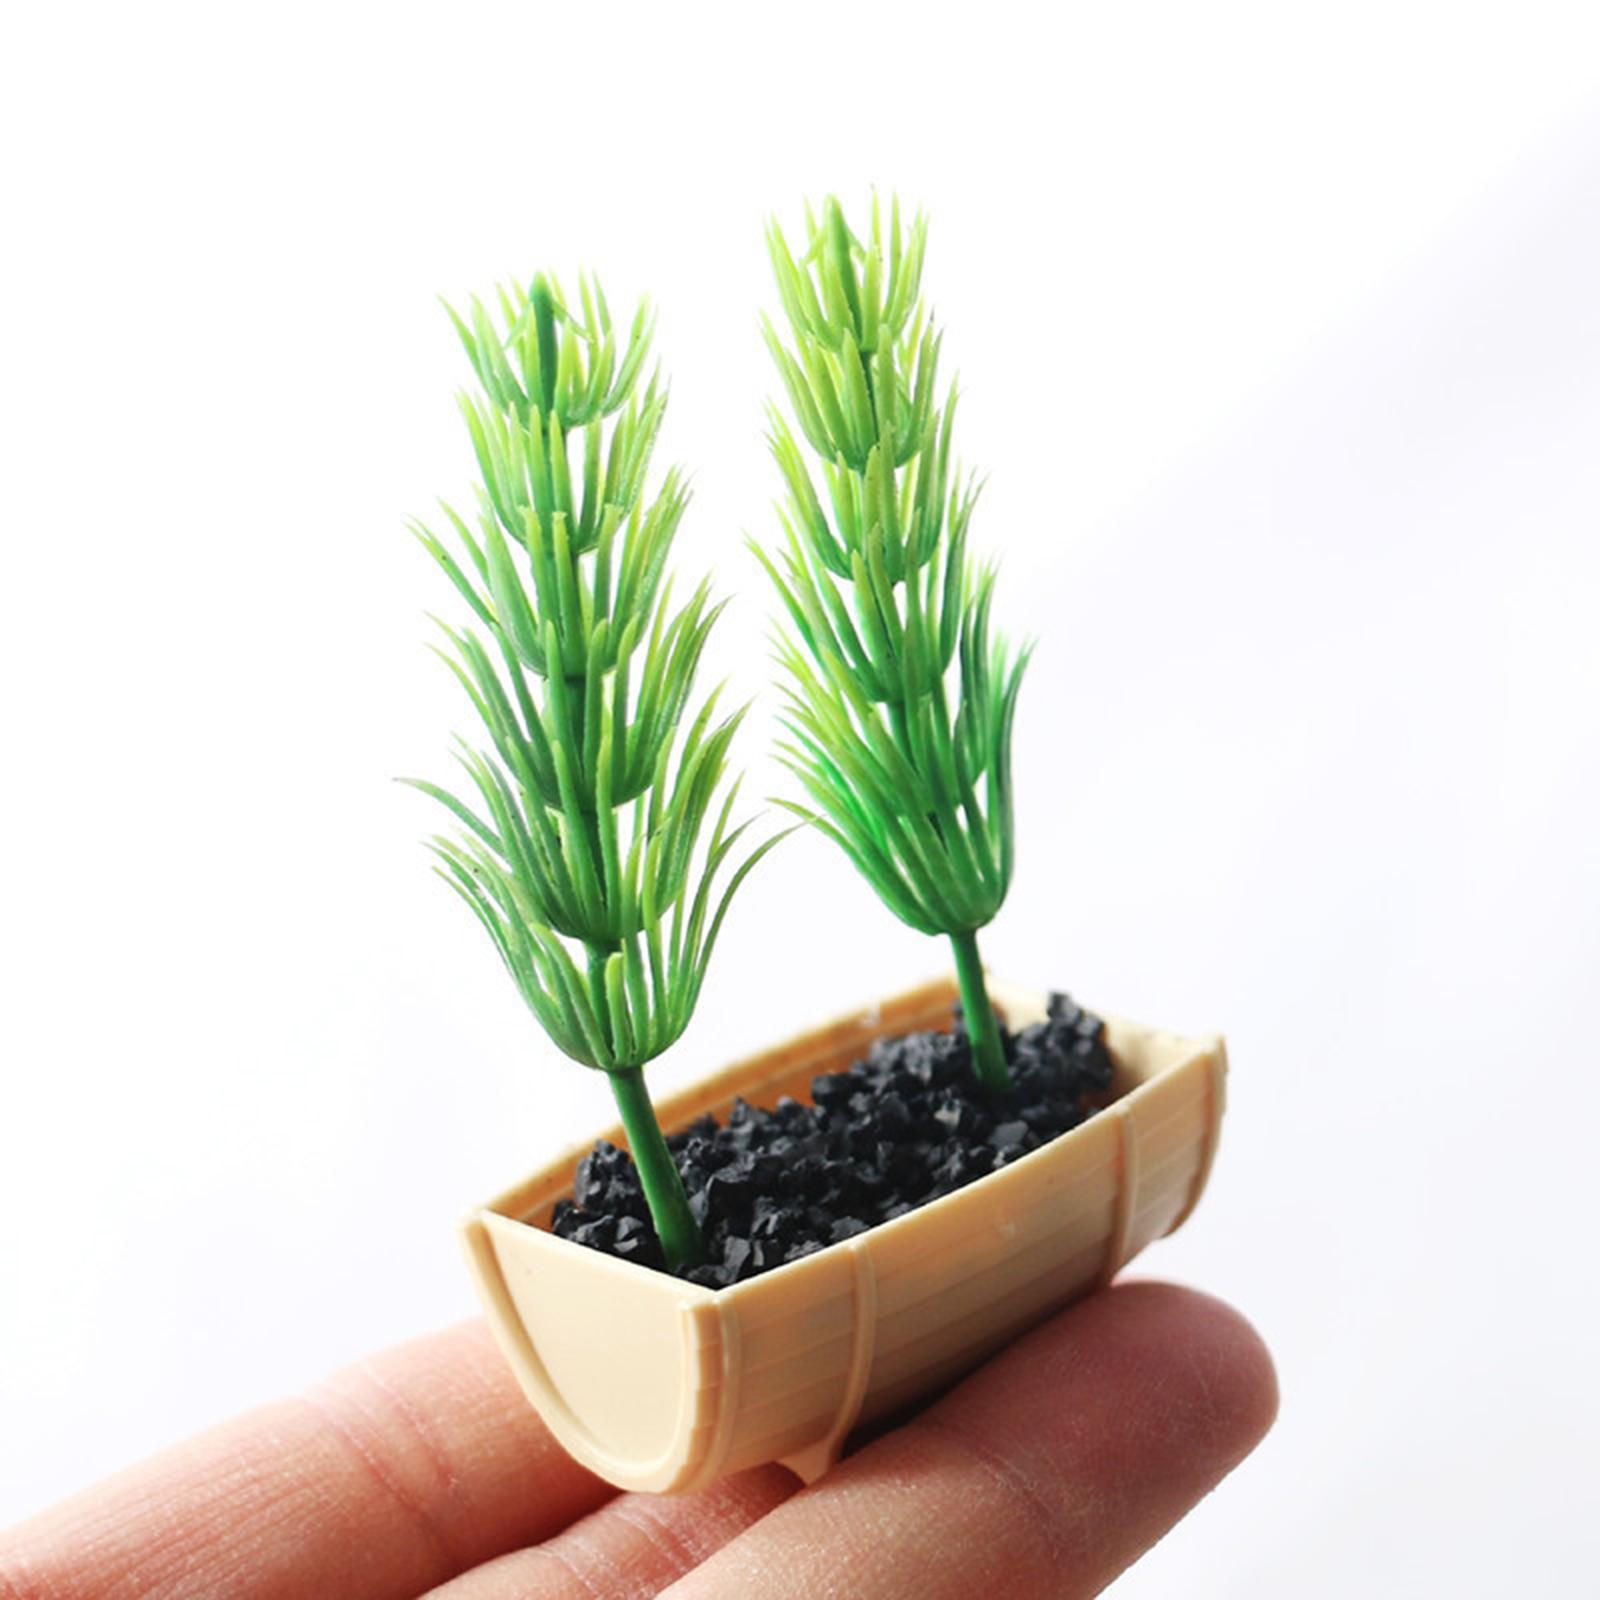 2 Pieces Dollhouse Plants Tiny Fake Greenery for Mini House Model Micro Landscape